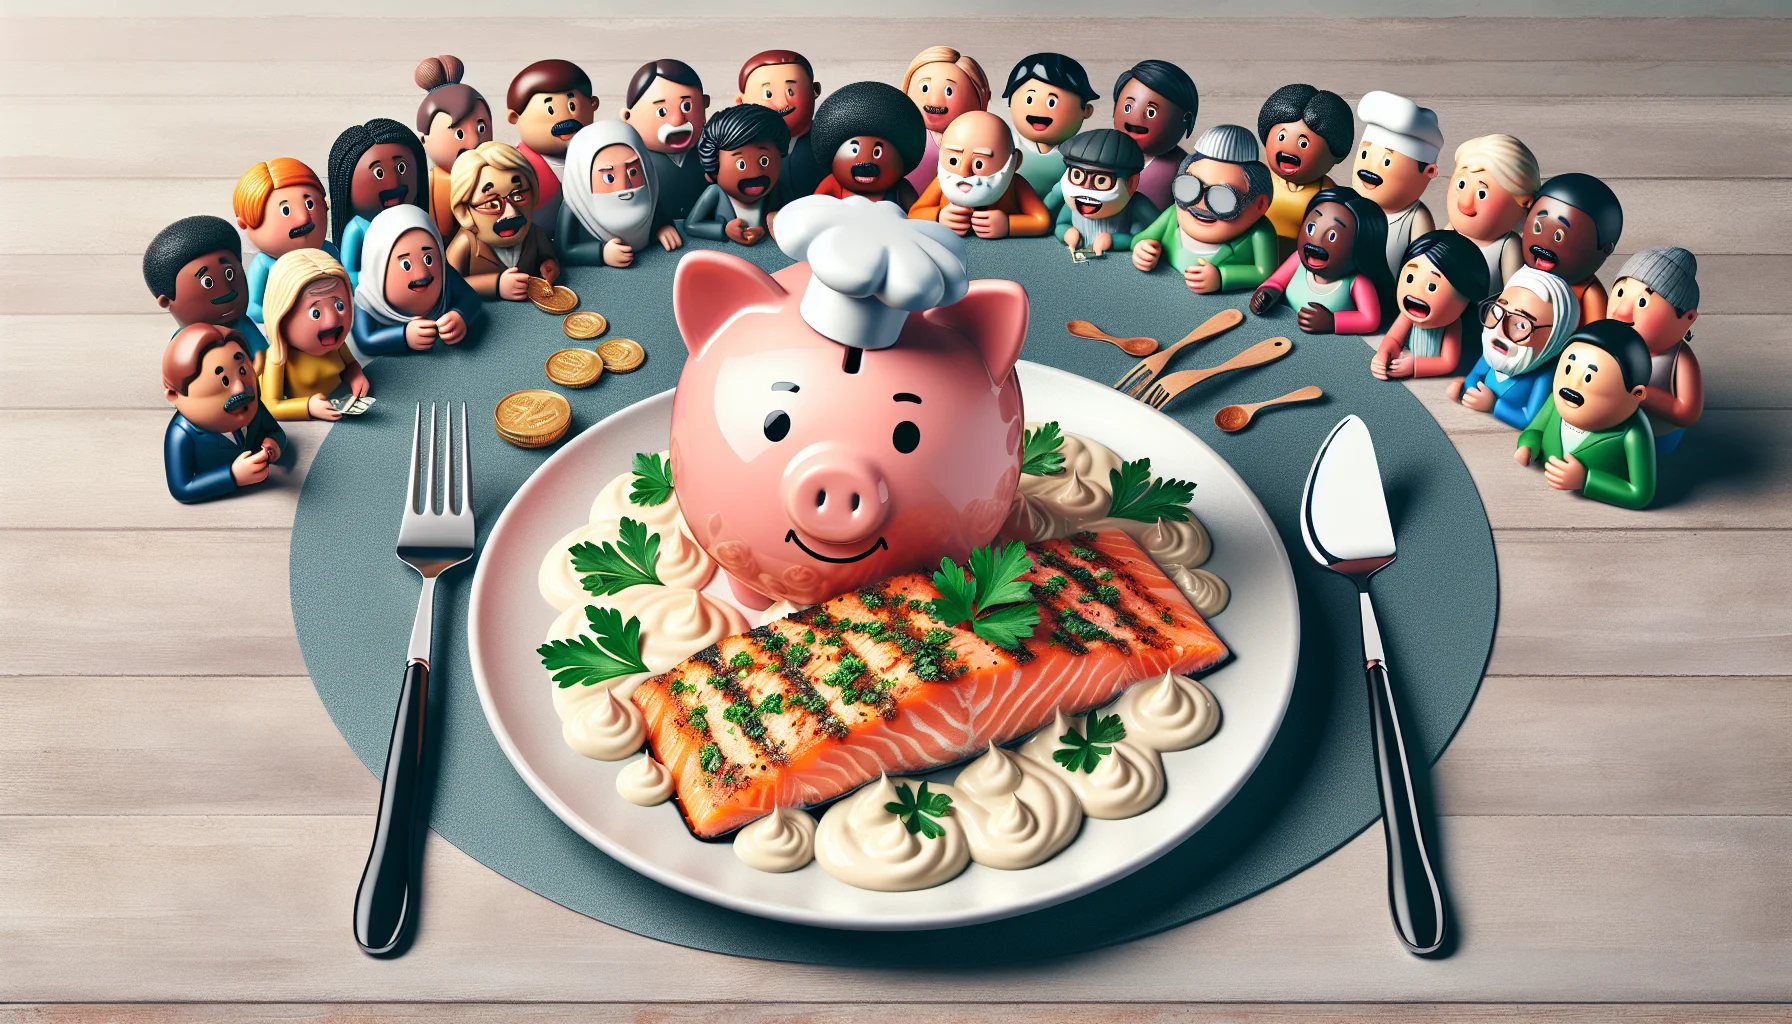 Create a humorous culinary scene. In the center, there is a plate of beautifully cooked salmon covered with creamy mayonnaise, garnished with bits of parsley. On one side, a cartoonish piggy bank is sitting, wearing a chef's hat and holding a spatula, smugly implying about saving money. On the other side, a diverse group of individuals are gathered, mouths watering, looking at the salmon dish with forks ready. They represent people of different descents such as Caucasian, Hispanic, Black, Middle-Eastern, and South Asian, and varying genders as well, insinuating the universal appeal of this healthy, pocket-friendly recipe.